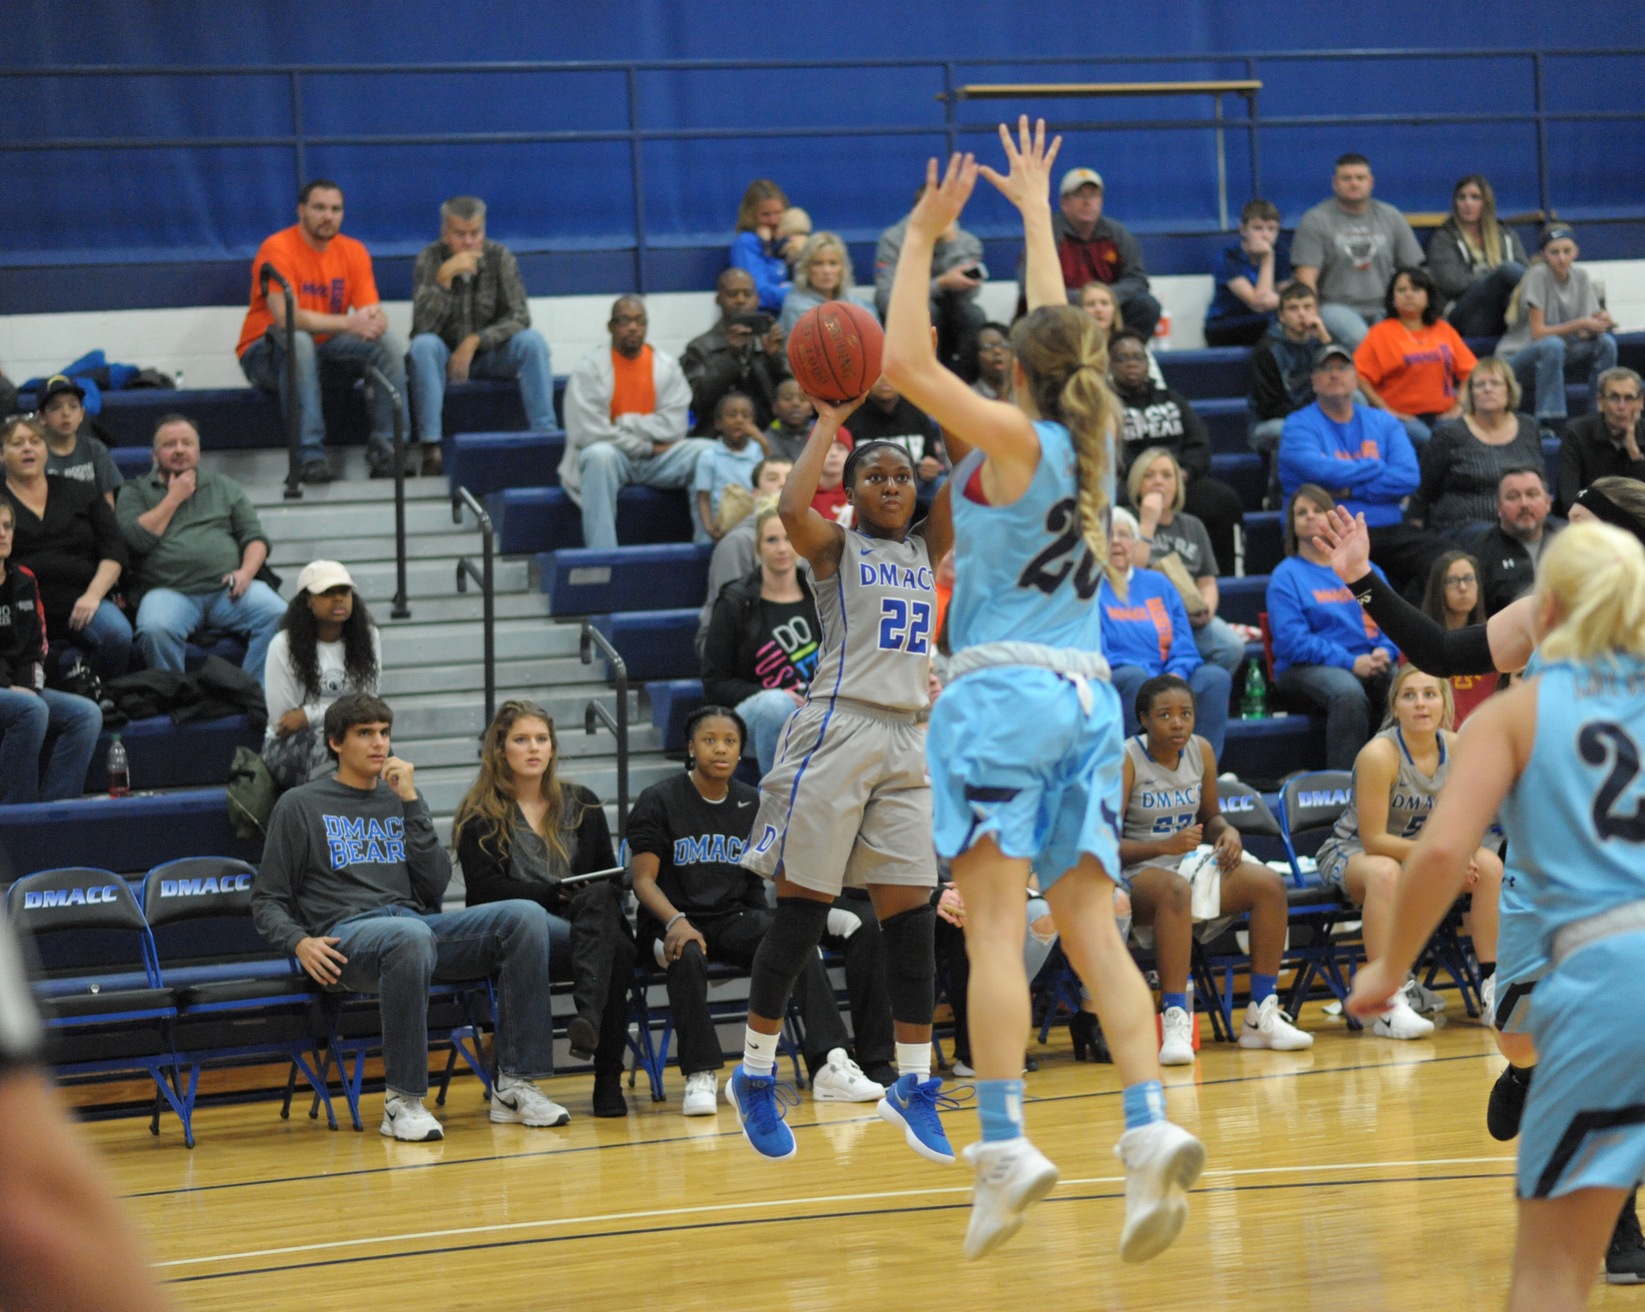 DMACC Women's Basketball Team Improves to 6-2 with 88-42 Win